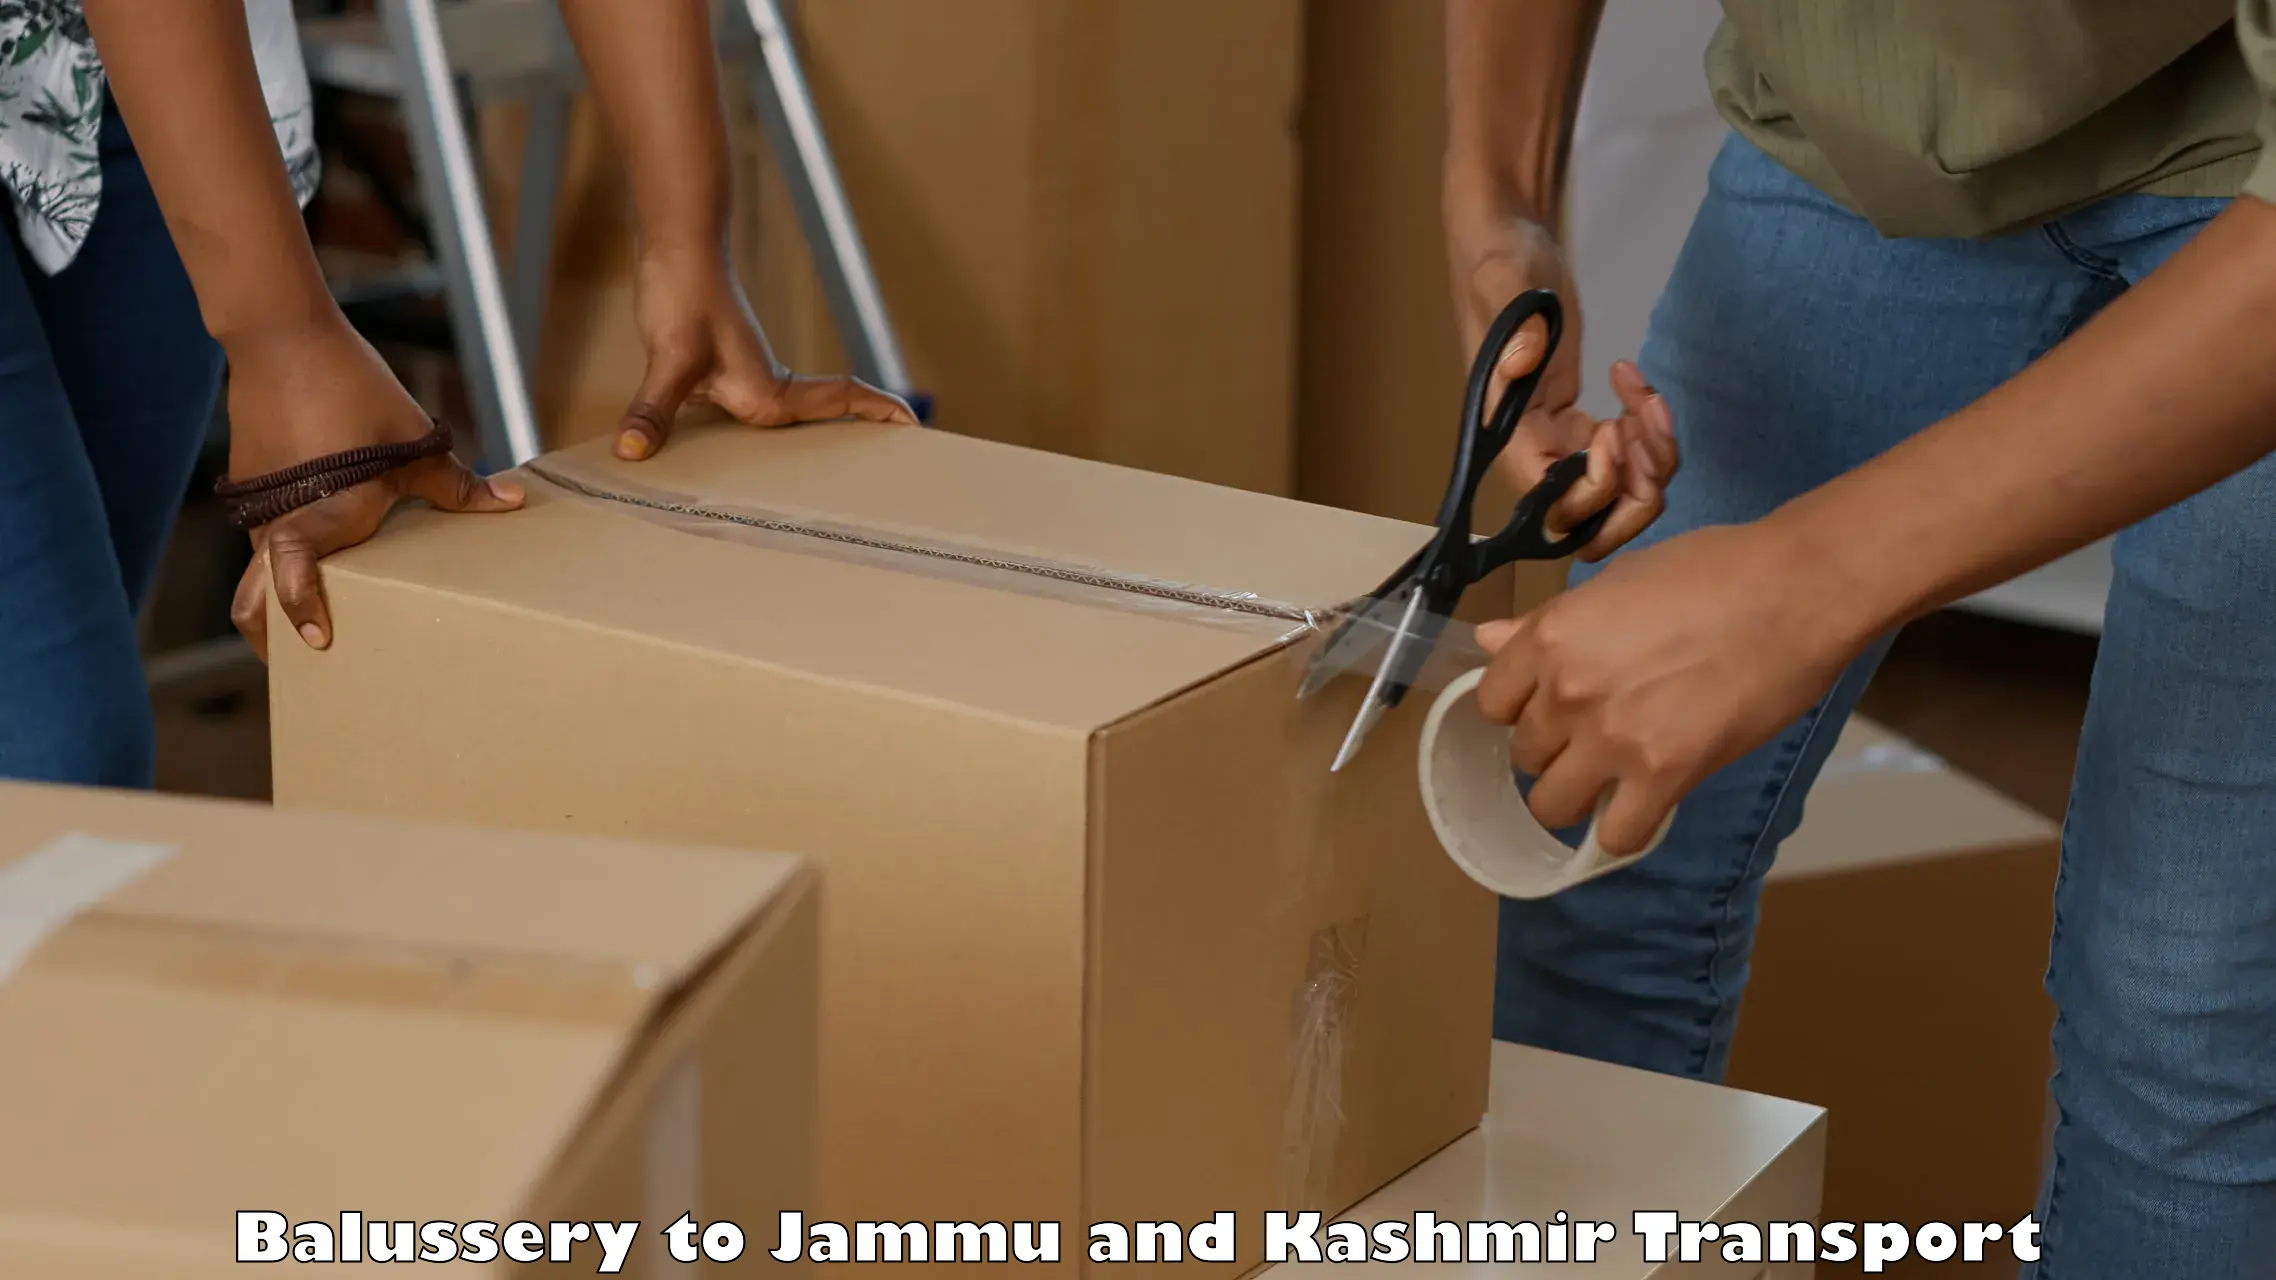 Cargo train transport services Balussery to Jammu and Kashmir